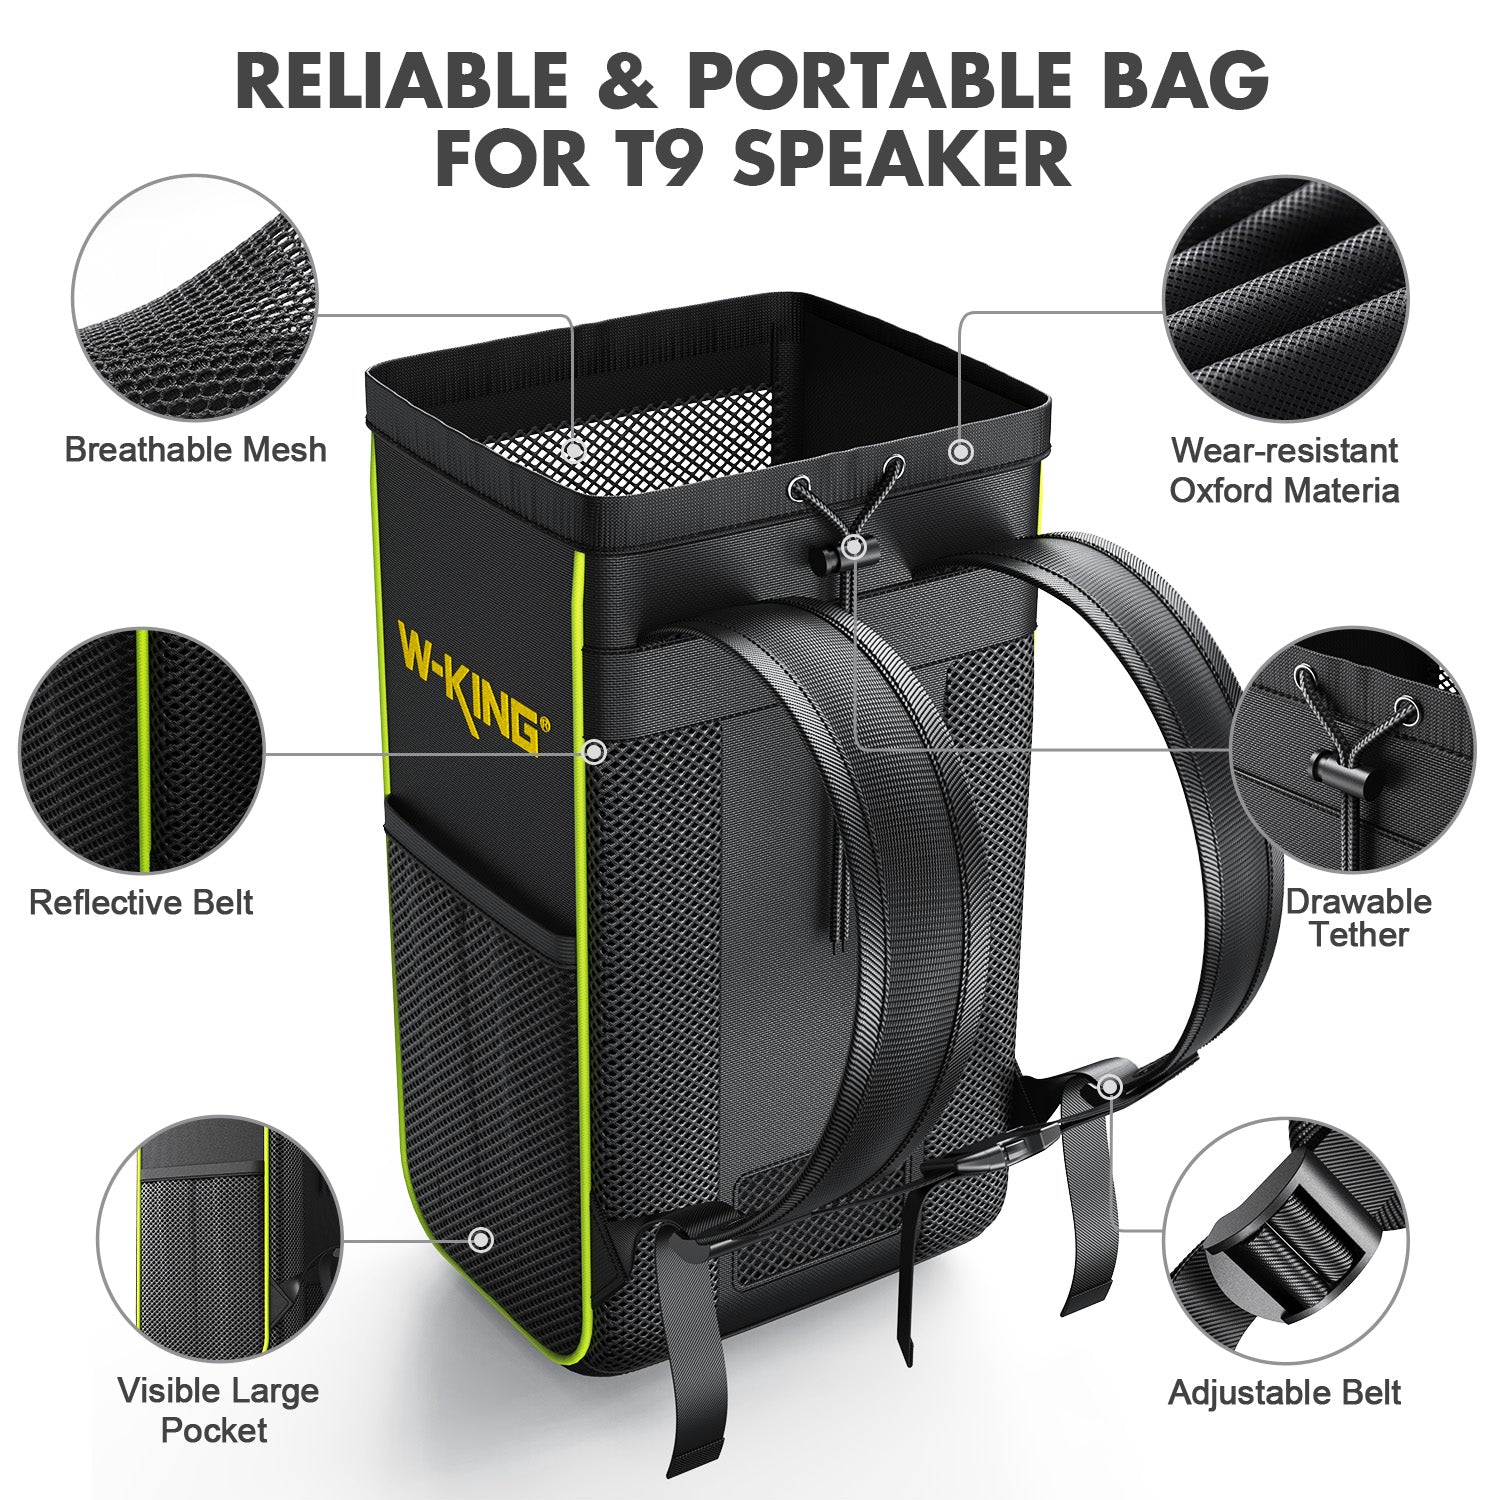 W-KING Case for T9